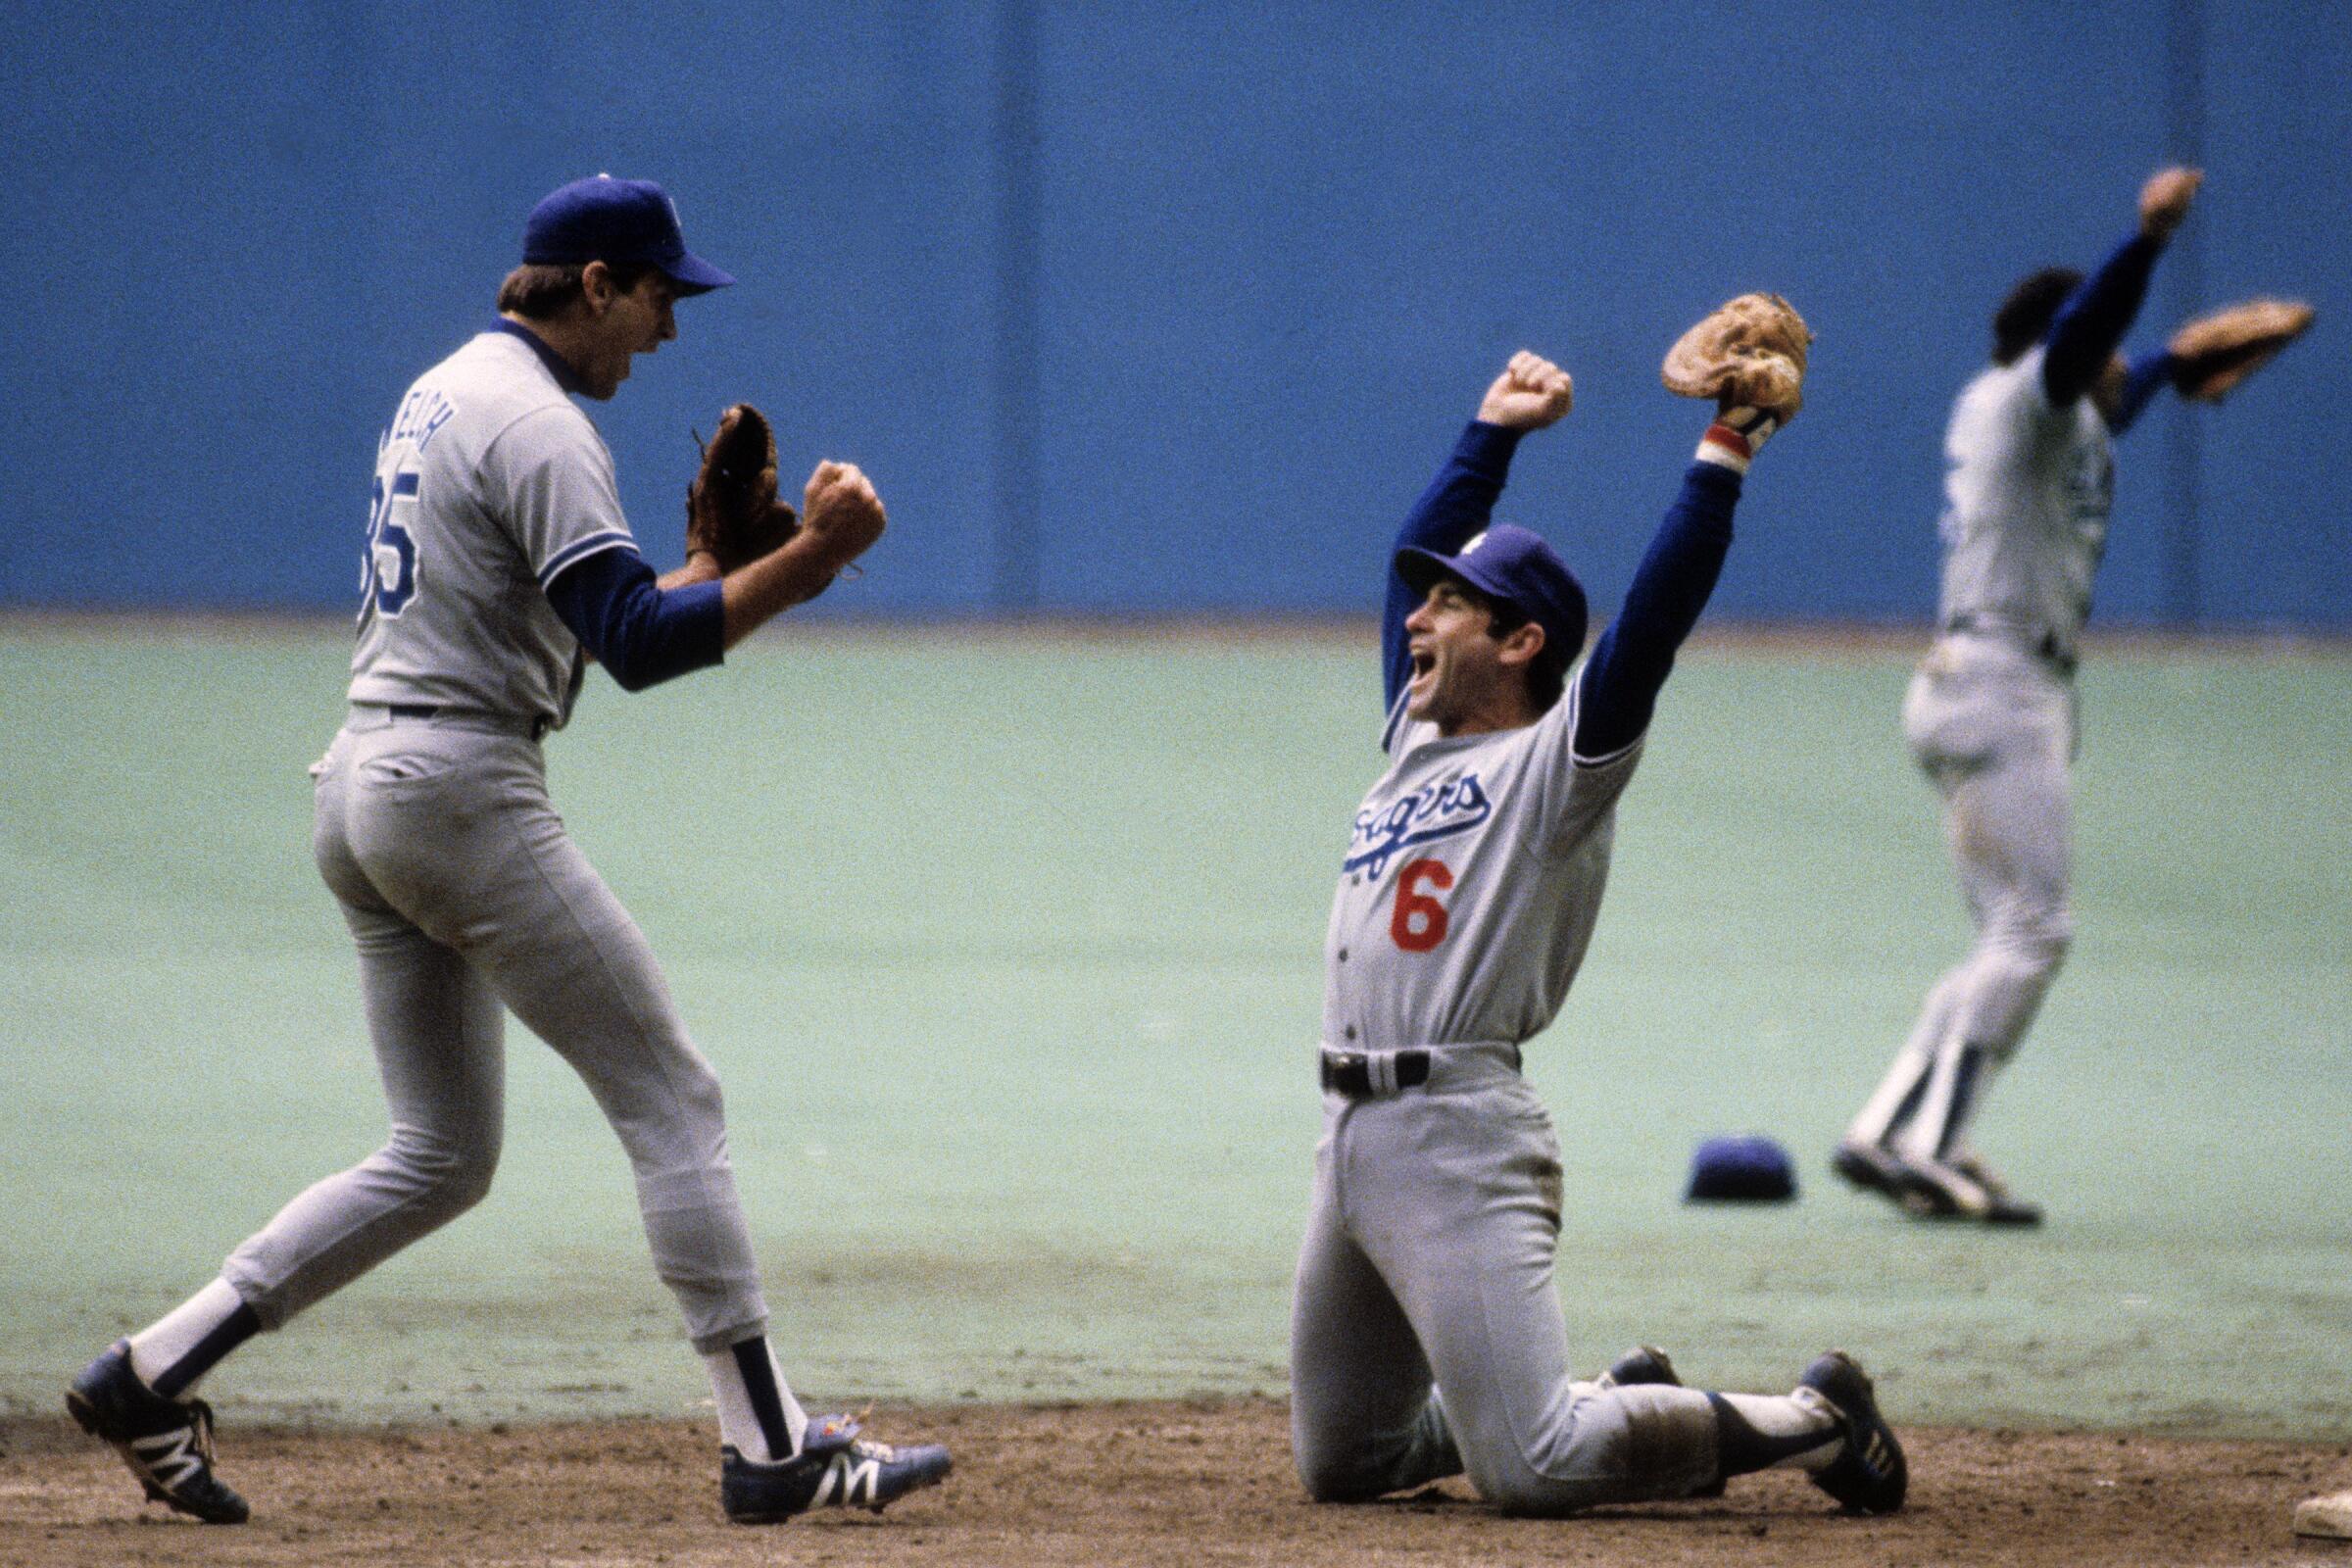 Baseball player, Ron Cey of the Chicago Cubs, March 14, 1983. (AP